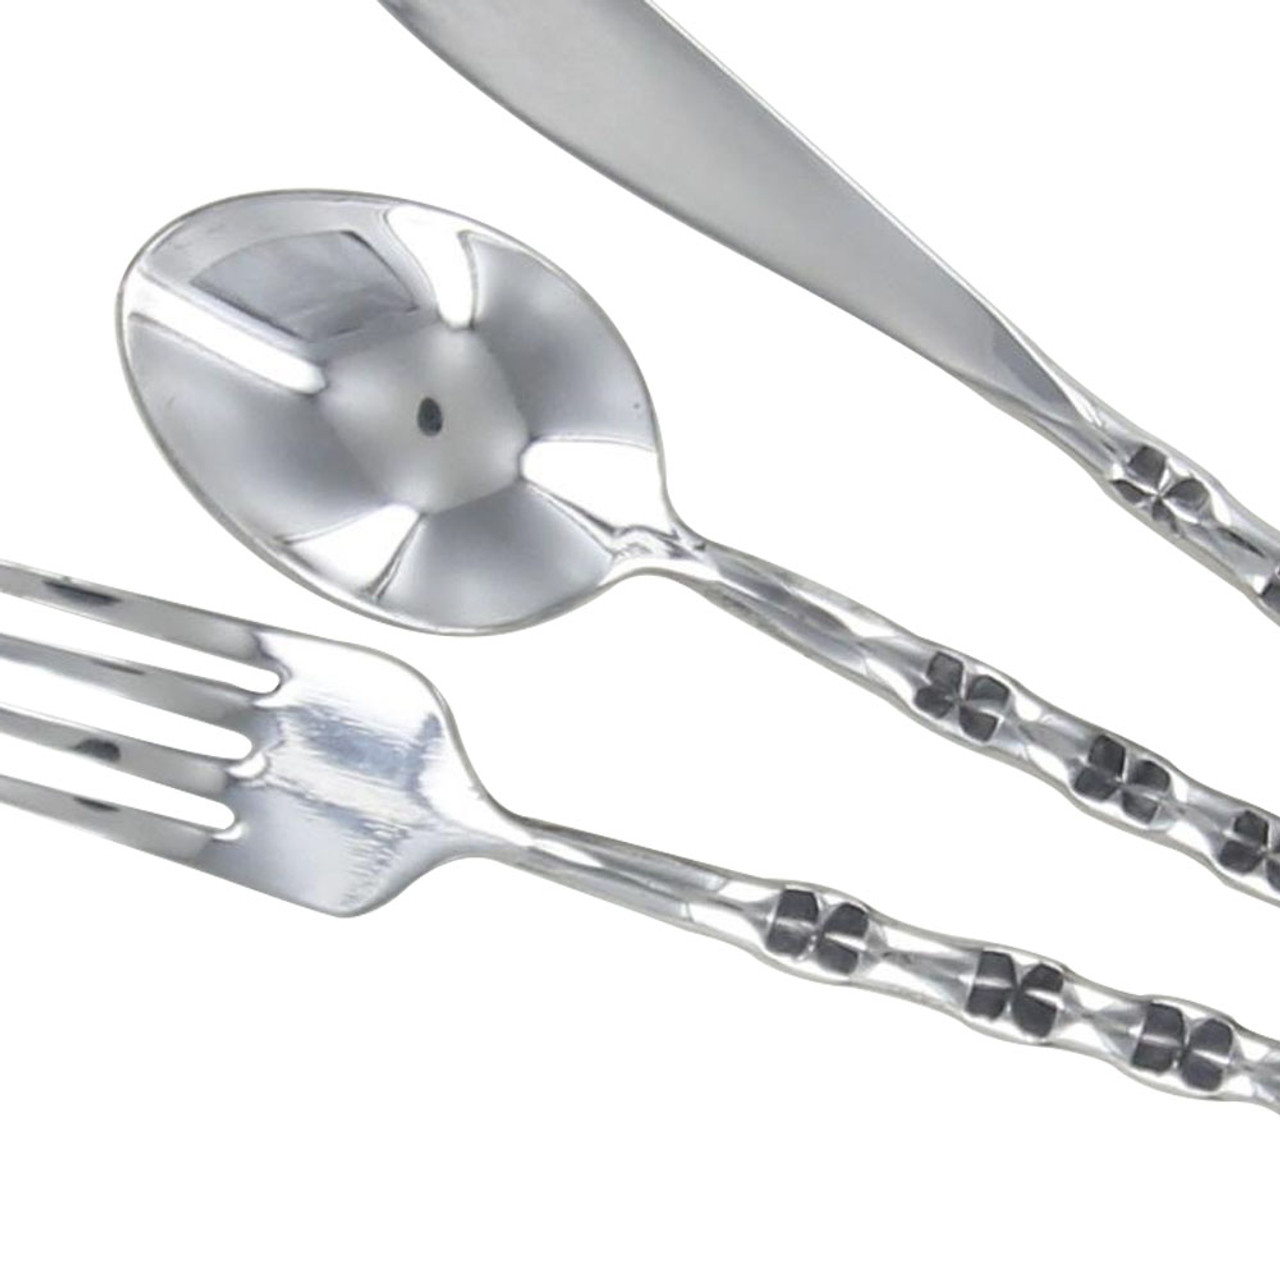 https://cdn11.bigcommerce.com/s-iut5ld55uy/images/stencil/1280x1280/products/34123/162000/ss-cutlery-set__46473.1564505047.jpg?c=2